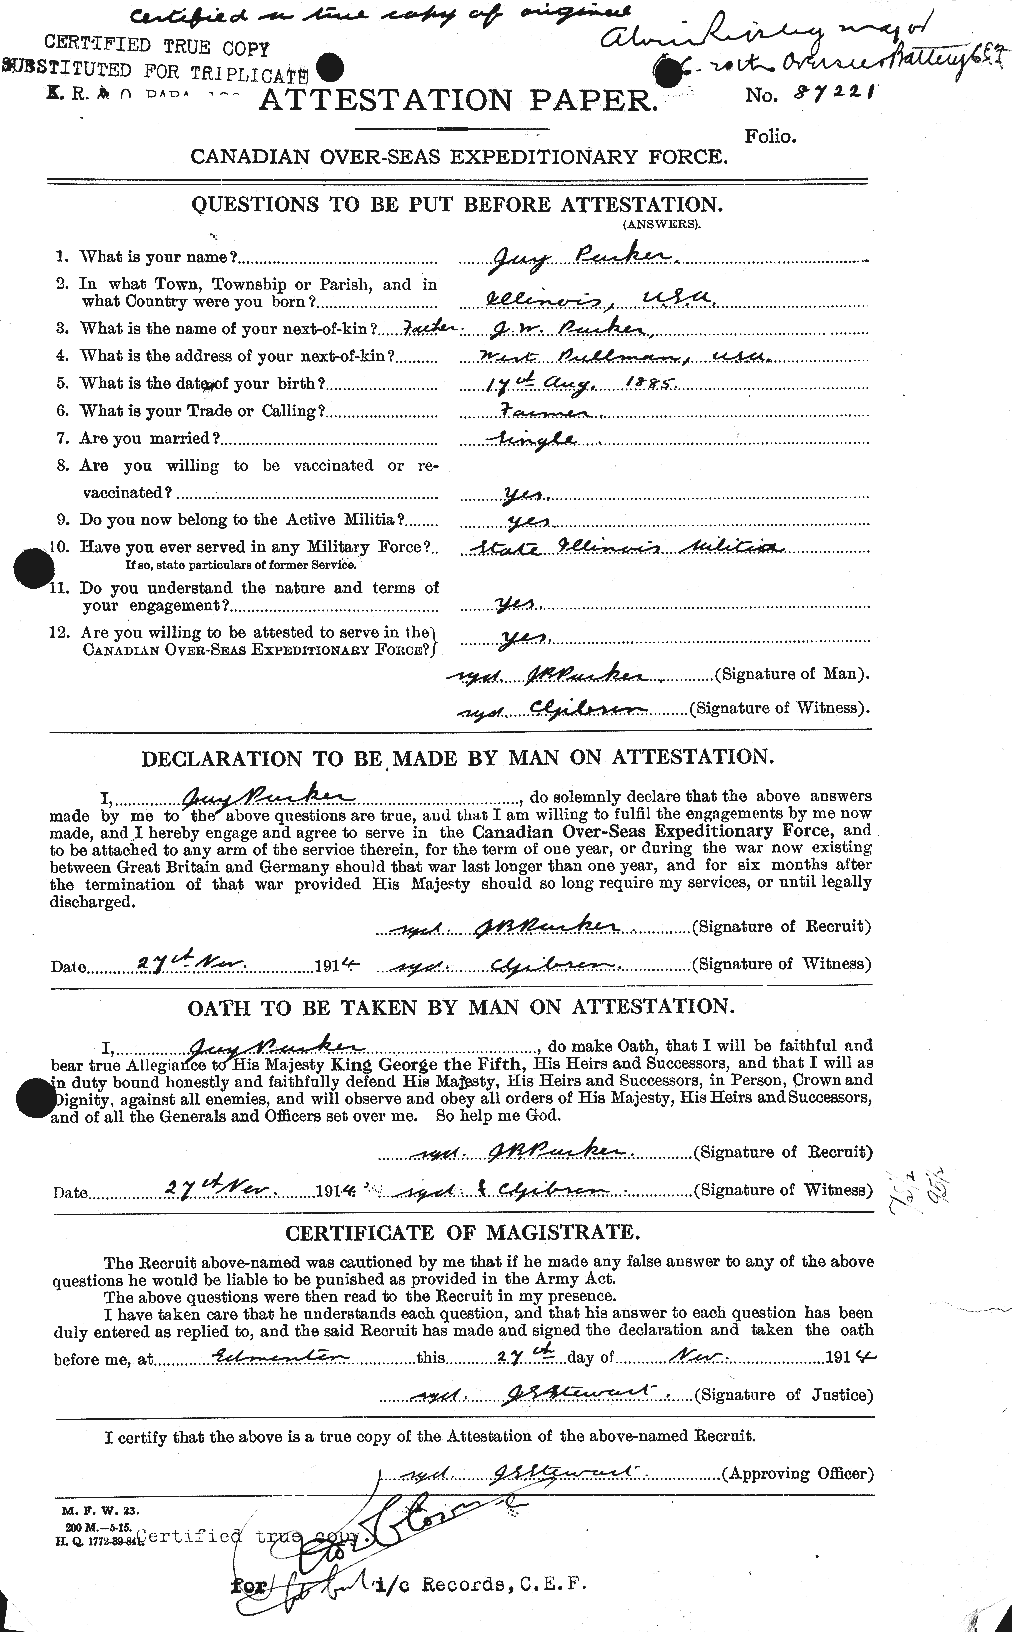 Personnel Records of the First World War - CEF 565515a